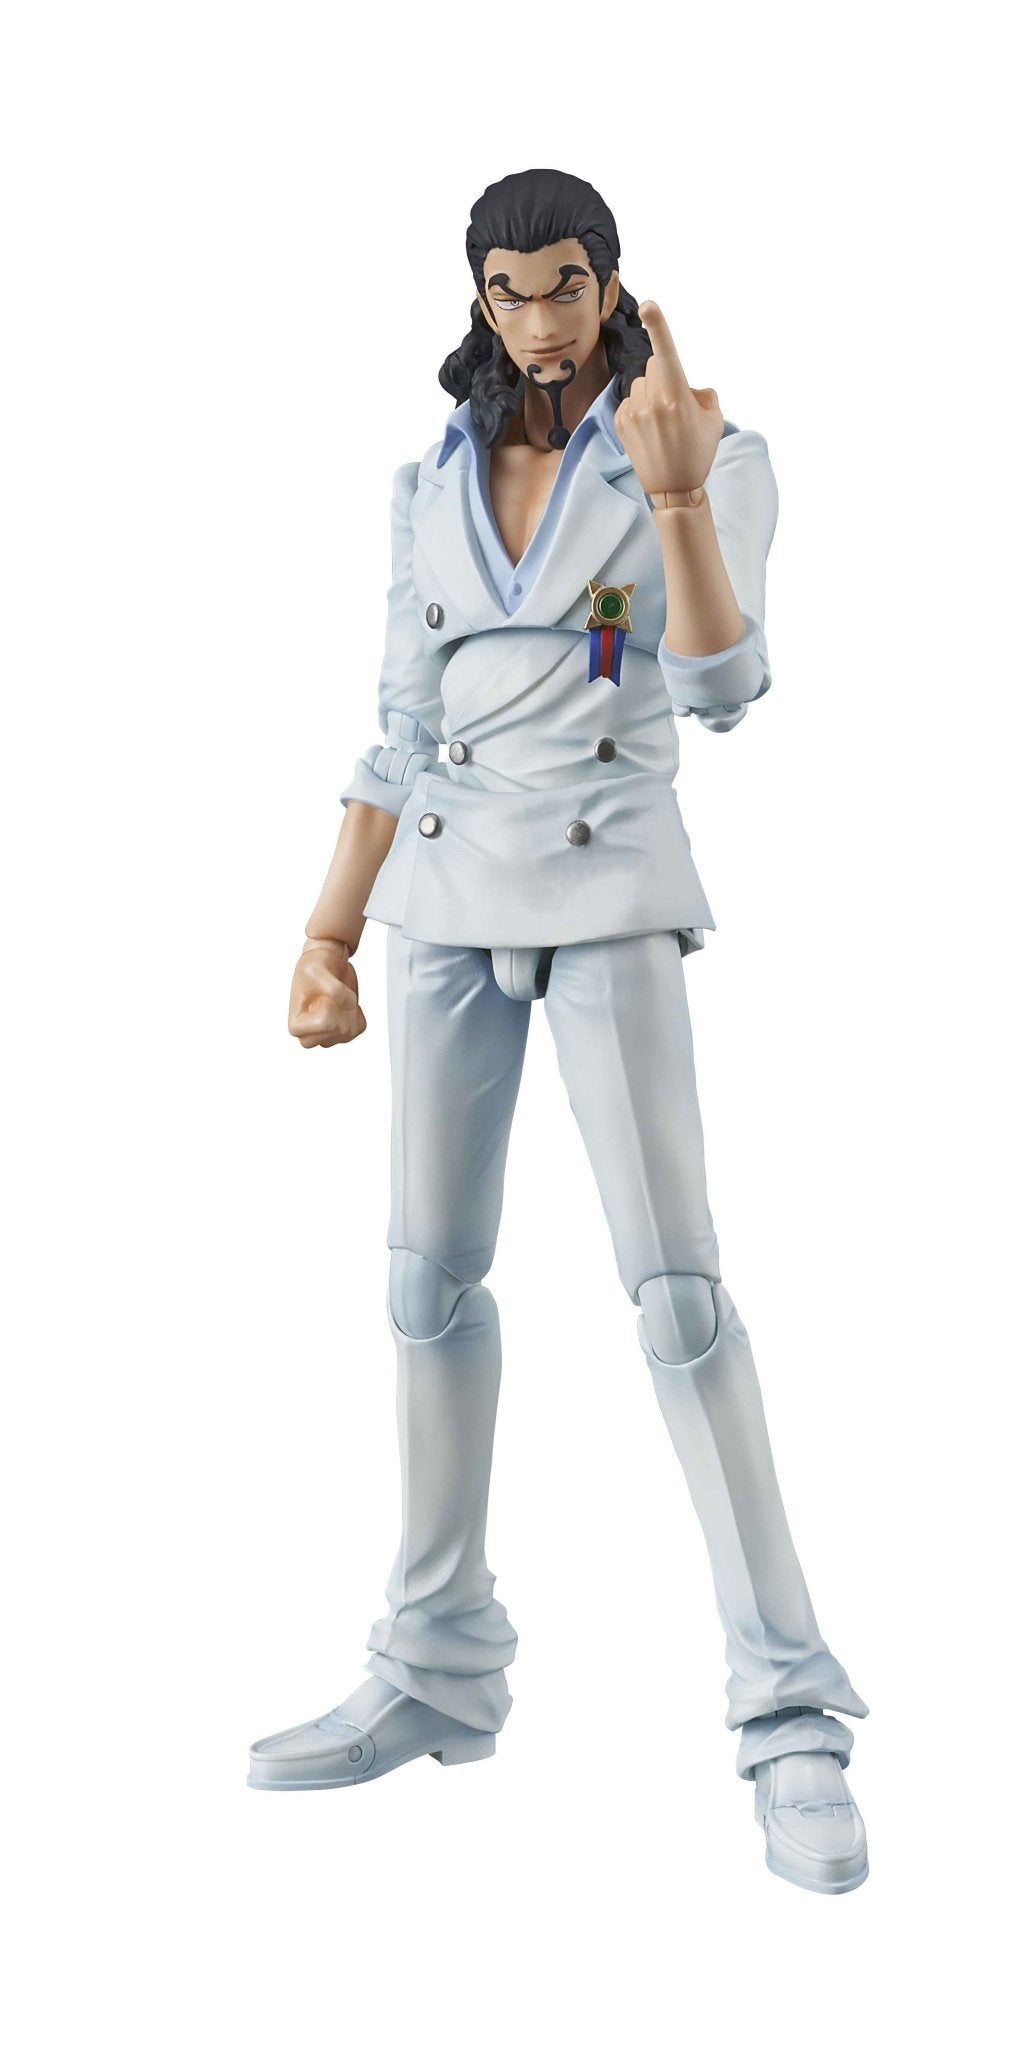 Variable Action Heroes - ONE PIECE: Rob Lucci Action Figure | animota